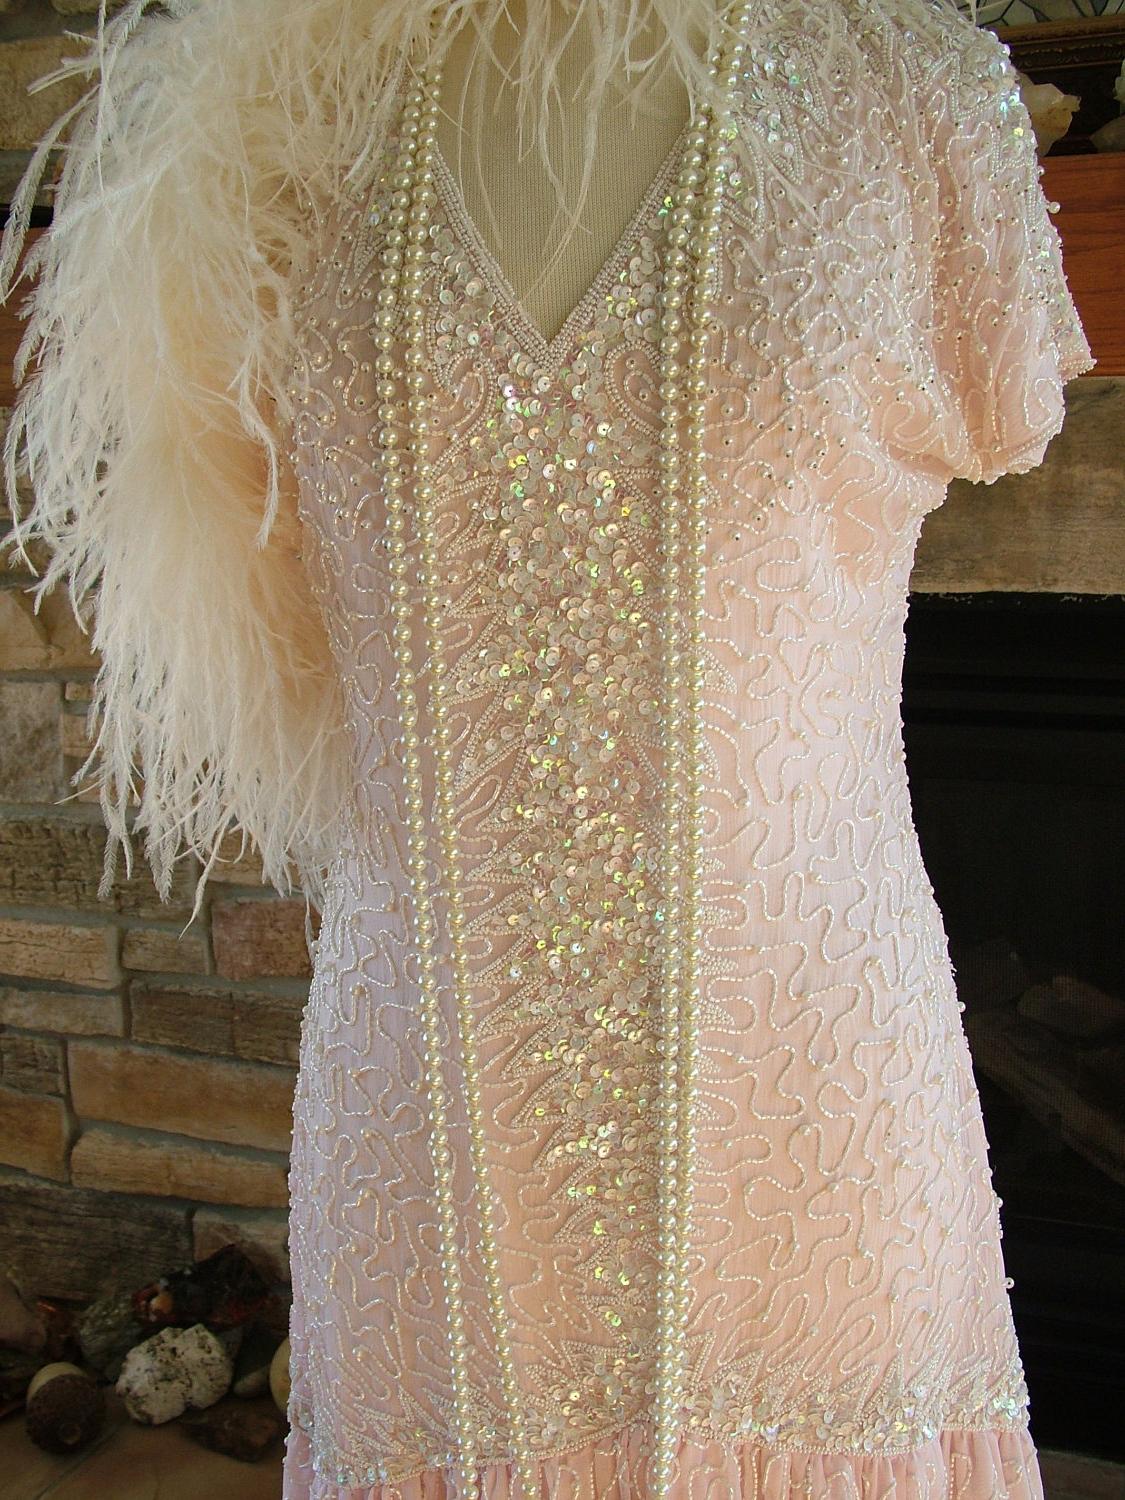 Vintage 1920s style beaded